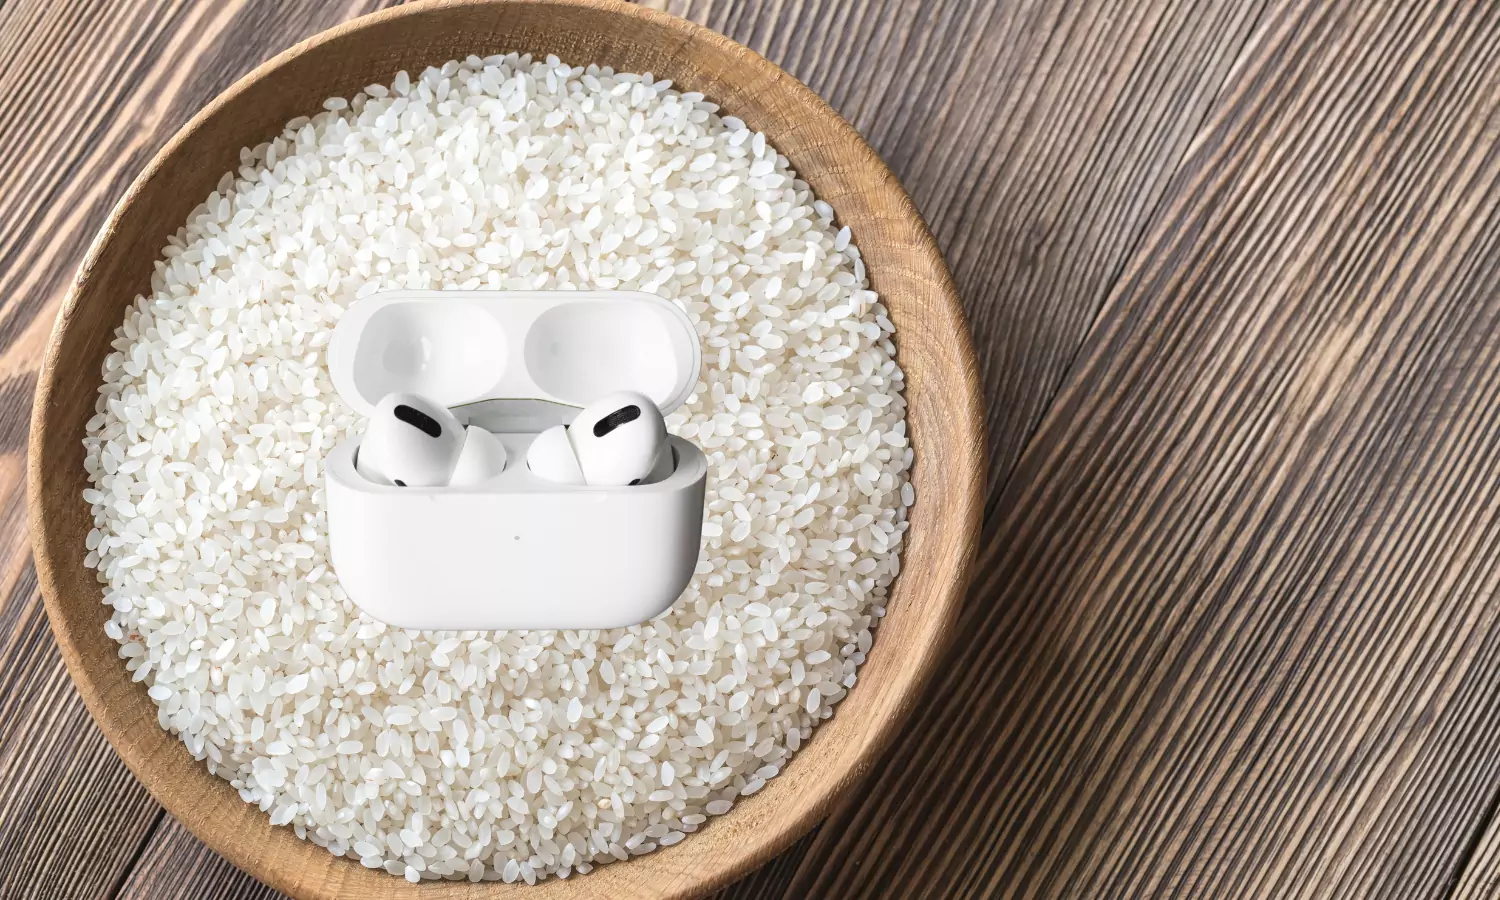 place-airpods-in-uncooked-rice